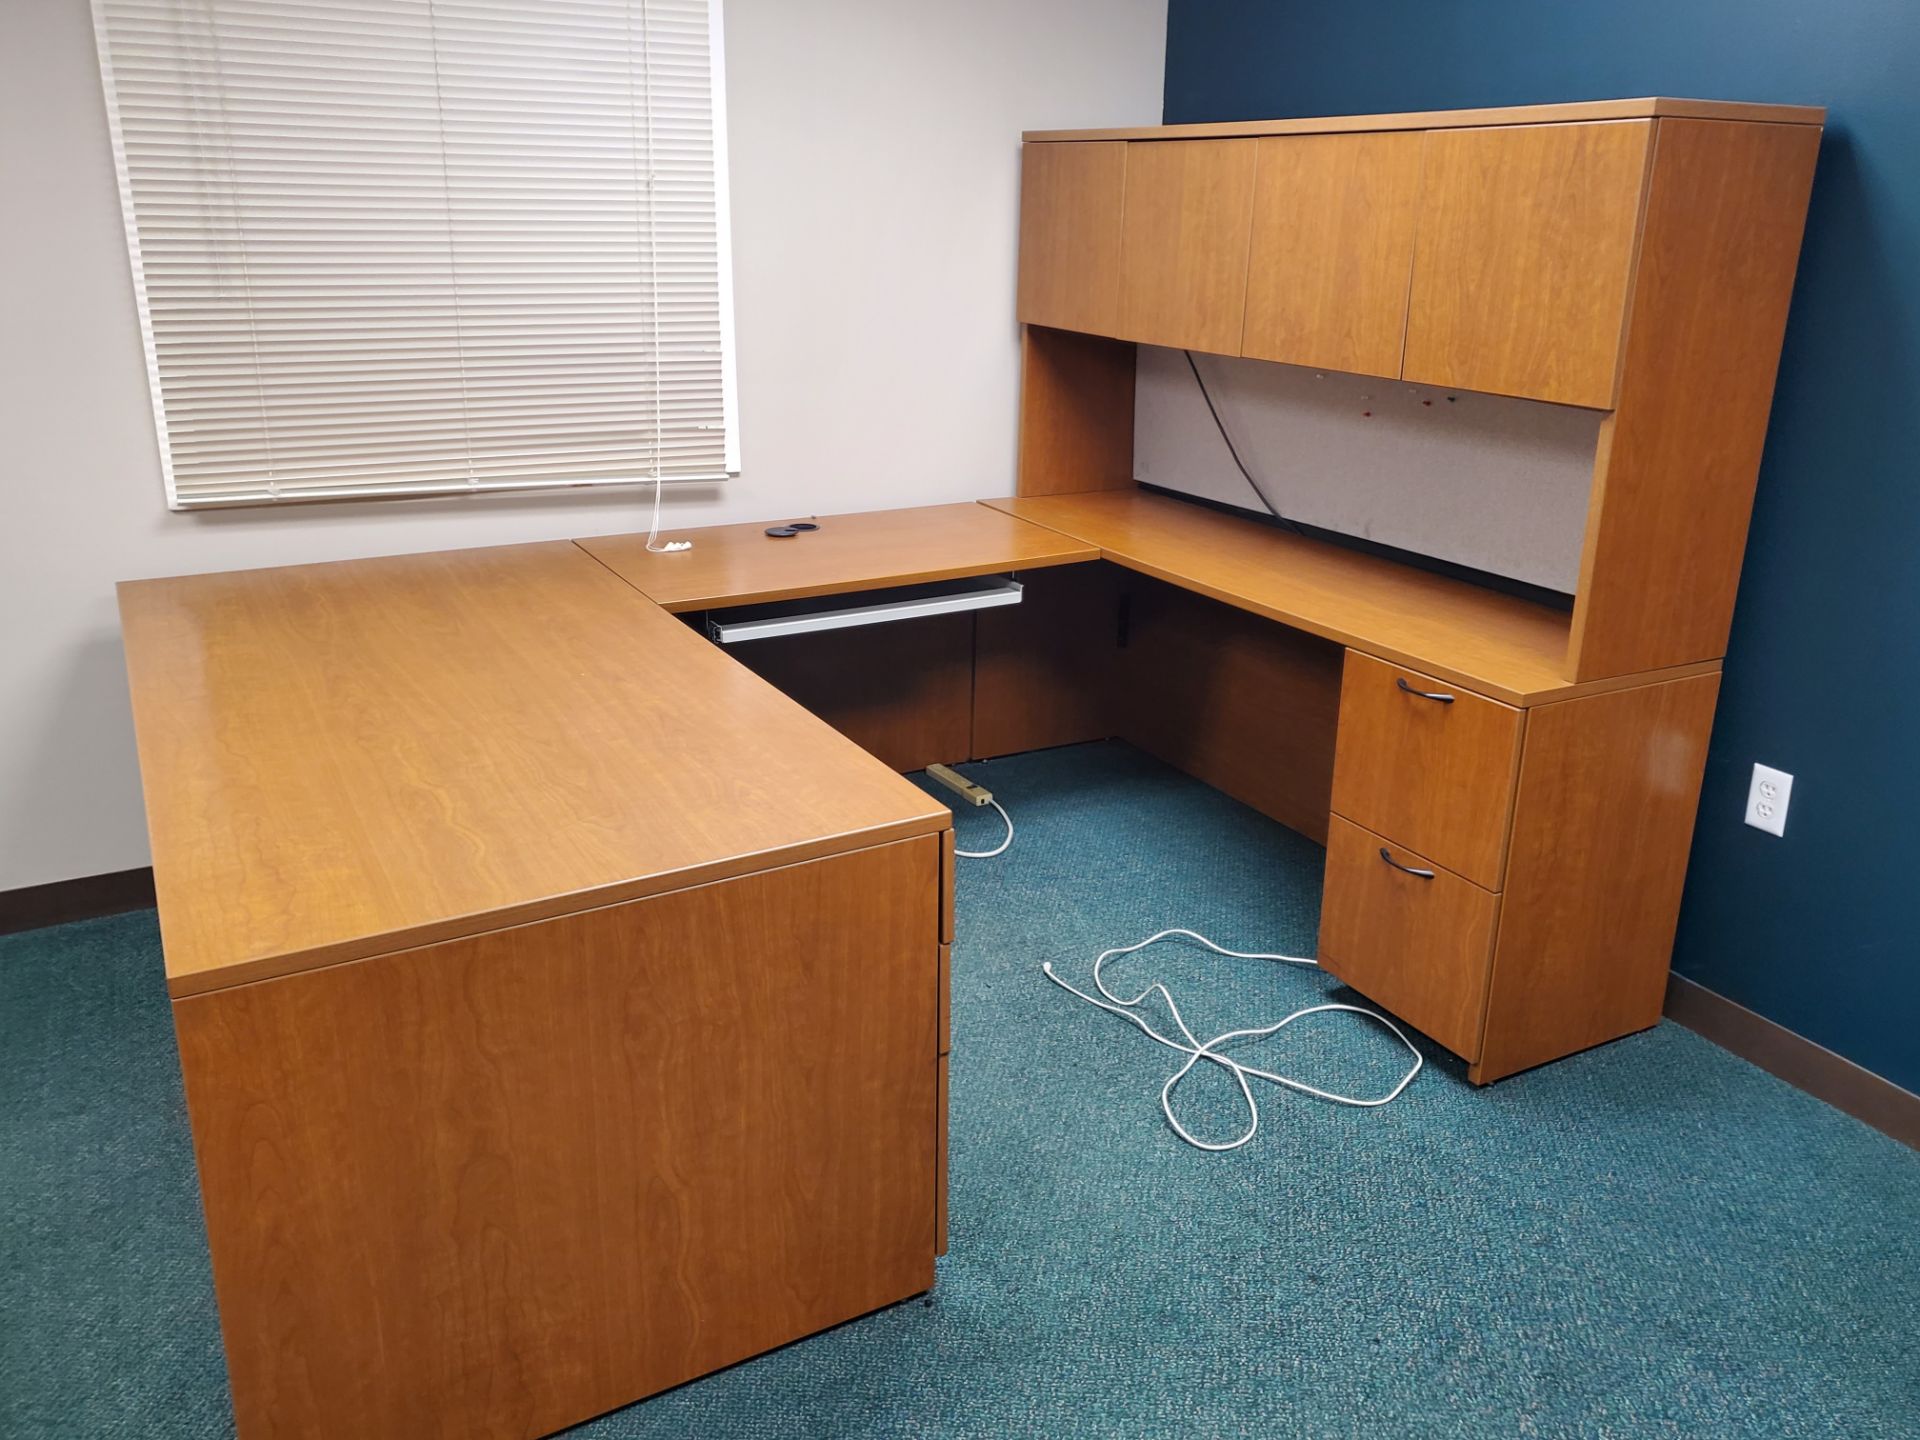 Furniture in Office (No Contents) - Image 2 of 3